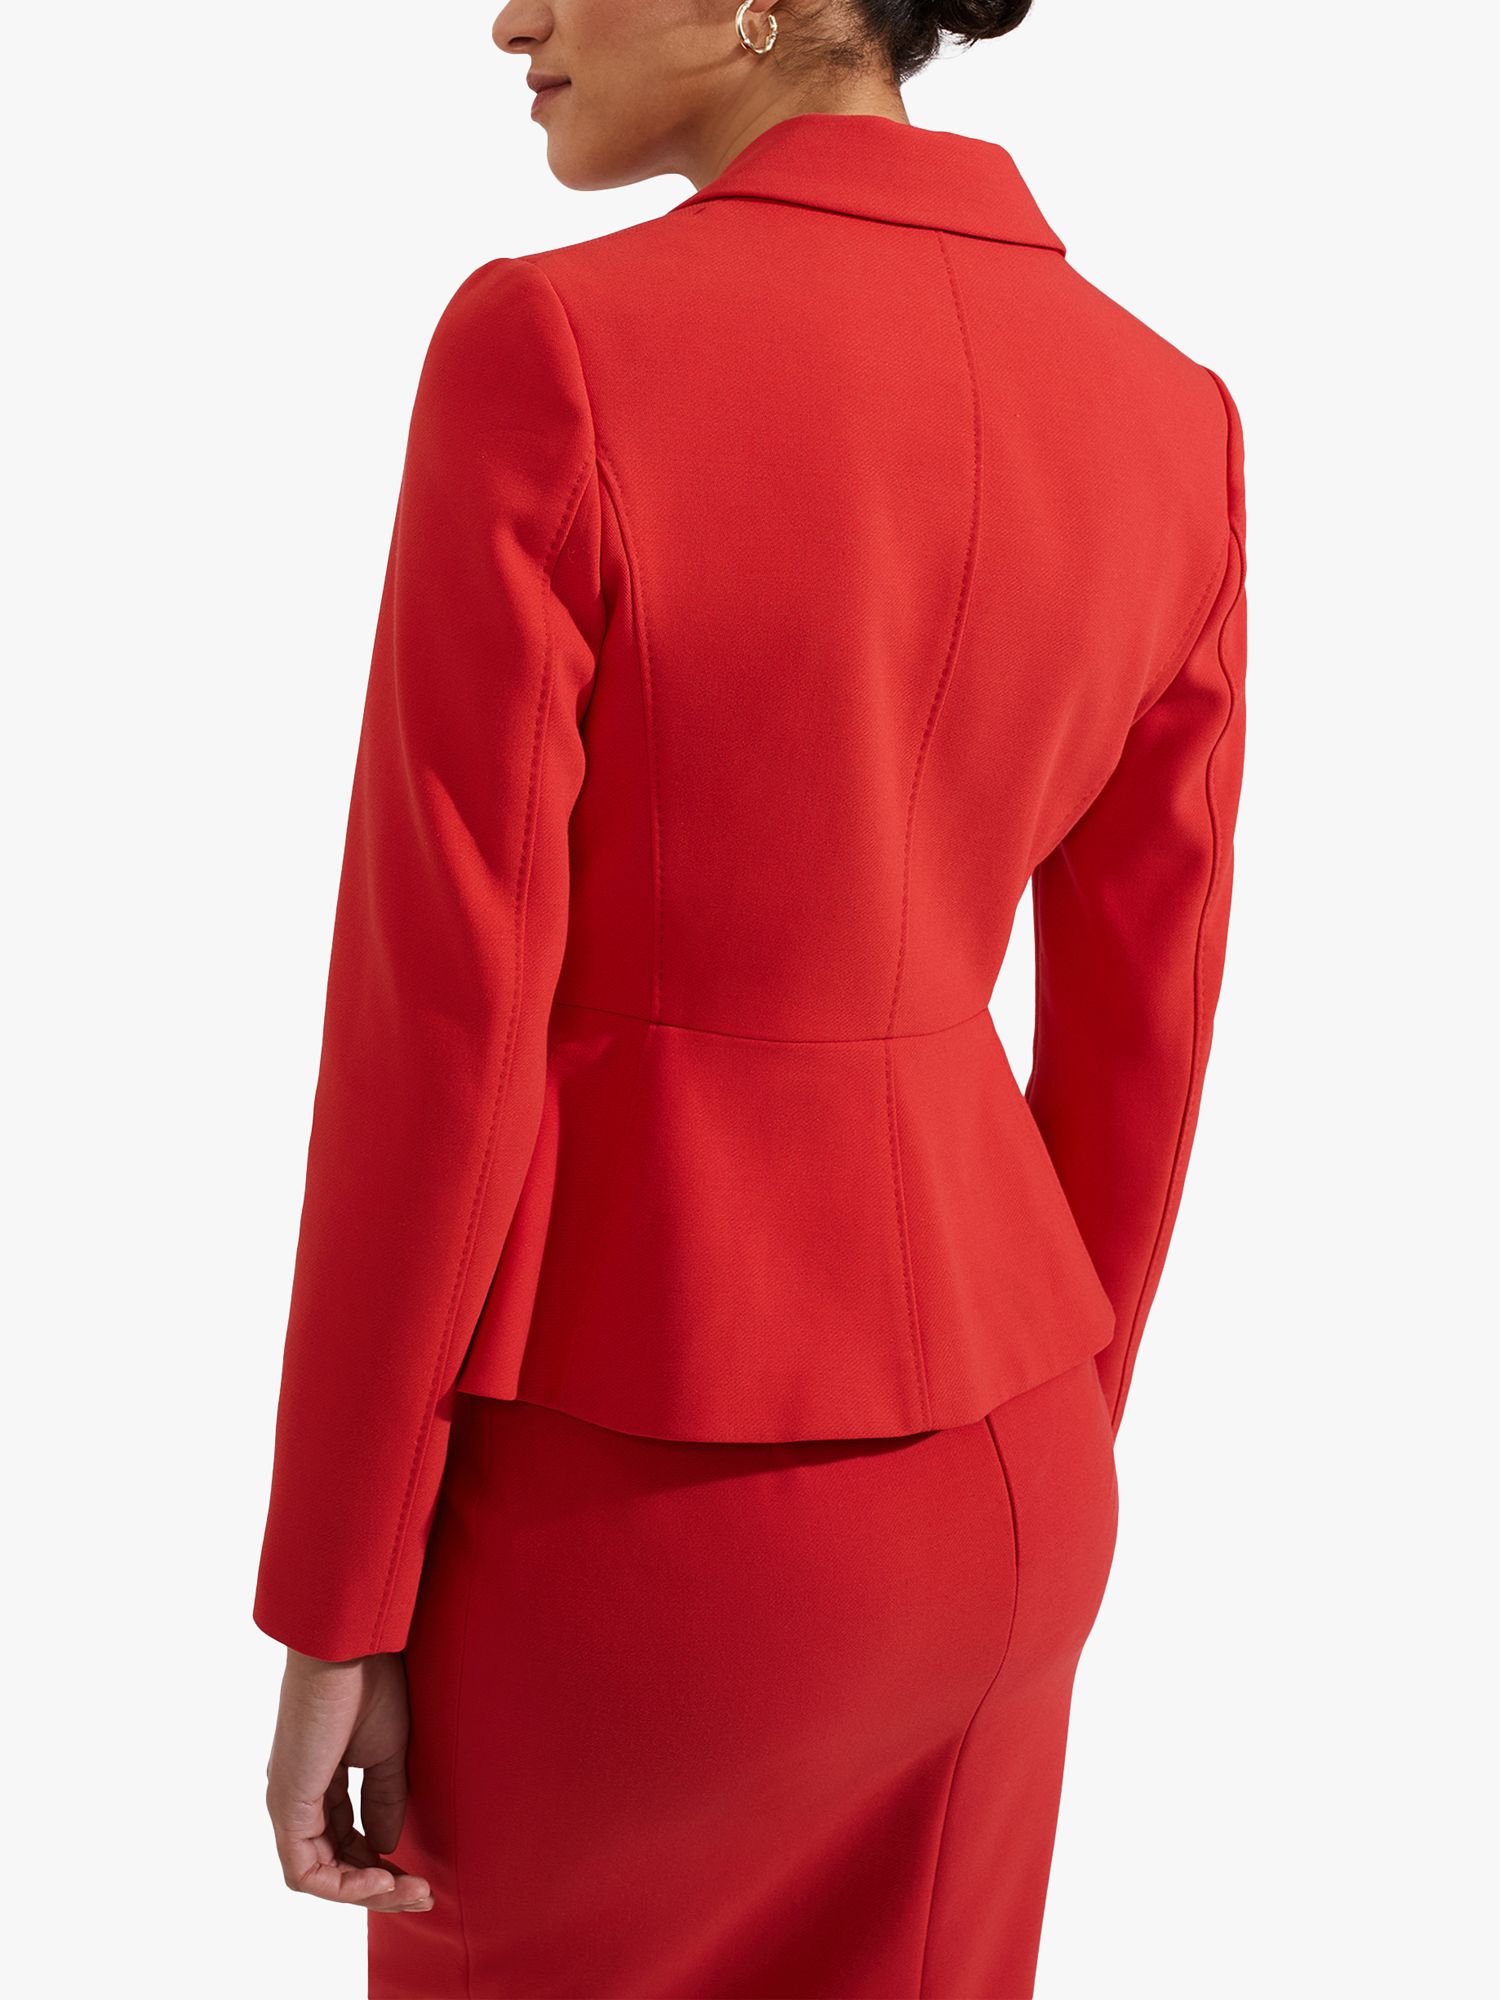 Buy Hobbs Brielle Tailored Jacket, Cherry Red Online at johnlewis.com